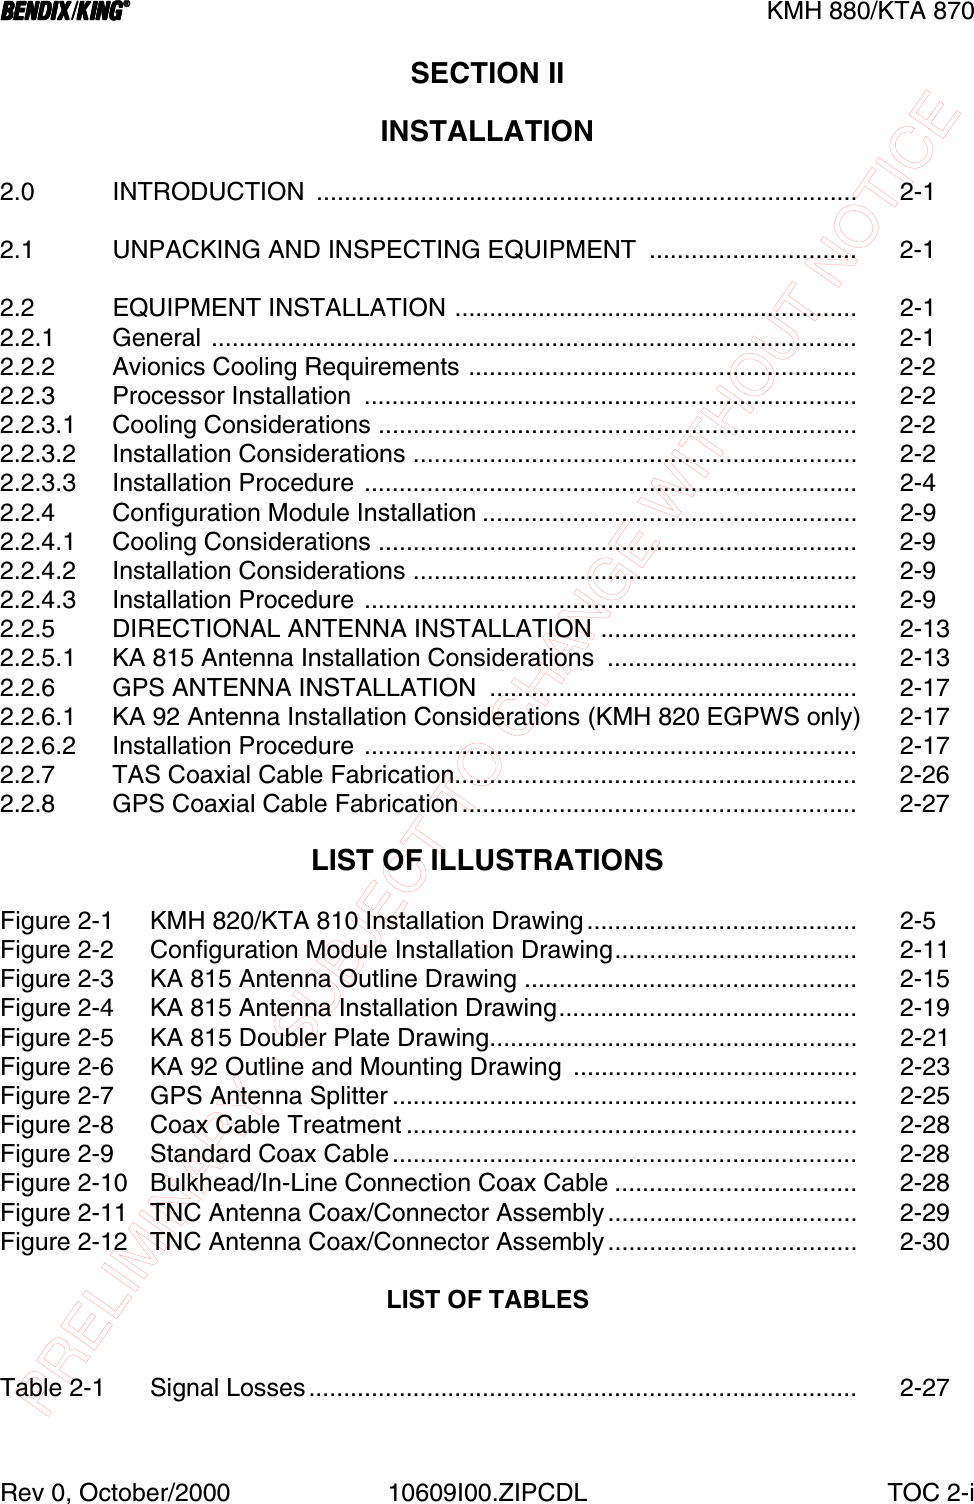 PRELIMINARY - SUBJECT TO CHANGE WITHOUT NOTICEBBBBKMH 880/KTA 870Rev 0, October/2000 10609I00.ZIPCDL TOC 2-iSECTION II INSTALLATION2.0 INTRODUCTION .............................................................................. 2-12.1 UNPACKING AND INSPECTING EQUIPMENT  .............................. 2-12.2 EQUIPMENT INSTALLATION .......................................................... 2-12.2.1 General ............................................................................................. 2-12.2.2 Avionics Cooling Requirements ........................................................ 2-22.2.3 Processor Installation  ....................................................................... 2-22.2.3.1 Cooling Considerations ..................................................................... 2-22.2.3.2 Installation Considerations ................................................................ 2-22.2.3.3 Installation Procedure ....................................................................... 2-42.2.4 Configuration Module Installation ...................................................... 2-92.2.4.1 Cooling Considerations ..................................................................... 2-92.2.4.2 Installation Considerations ................................................................ 2-92.2.4.3 Installation Procedure ....................................................................... 2-92.2.5 DIRECTIONAL ANTENNA INSTALLATION ..................................... 2-132.2.5.1 KA 815 Antenna Installation Considerations  .................................... 2-132.2.6 GPS ANTENNA INSTALLATION  ..................................................... 2-172.2.6.1 KA 92 Antenna Installation Considerations (KMH 820 EGPWS only)  2-172.2.6.2 Installation Procedure ....................................................................... 2-172.2.7 TAS Coaxial Cable Fabrication.......................................................... 2-262.2.8 GPS Coaxial Cable Fabrication......................................................... 2-27LIST OF ILLUSTRATIONSFigure 2-1 KMH 820/KTA 810 Installation Drawing....................................... 2-5Figure 2-2  Configuration Module Installation Drawing................................... 2-11Figure 2-3 KA 815 Antenna Outline Drawing ................................................ 2-15Figure 2-4 KA 815 Antenna Installation Drawing........................................... 2-19Figure 2-5 KA 815 Doubler Plate Drawing..................................................... 2-21Figure 2-6  KA 92 Outline and Mounting Drawing  ......................................... 2-23Figure 2-7 GPS Antenna Splitter ................................................................... 2-25Figure 2-8 Coax Cable Treatment ................................................................. 2-28Figure 2-9 Standard Coax Cable................................................................... 2-28Figure 2-10 Bulkhead/In-Line Connection Coax Cable ................................... 2-28Figure 2-11 TNC Antenna Coax/Connector Assembly.................................... 2-29Figure 2-12 TNC Antenna Coax/Connector Assembly.................................... 2-30LIST OF TABLESTable 2-1 Signal Losses............................................................................... 2-27